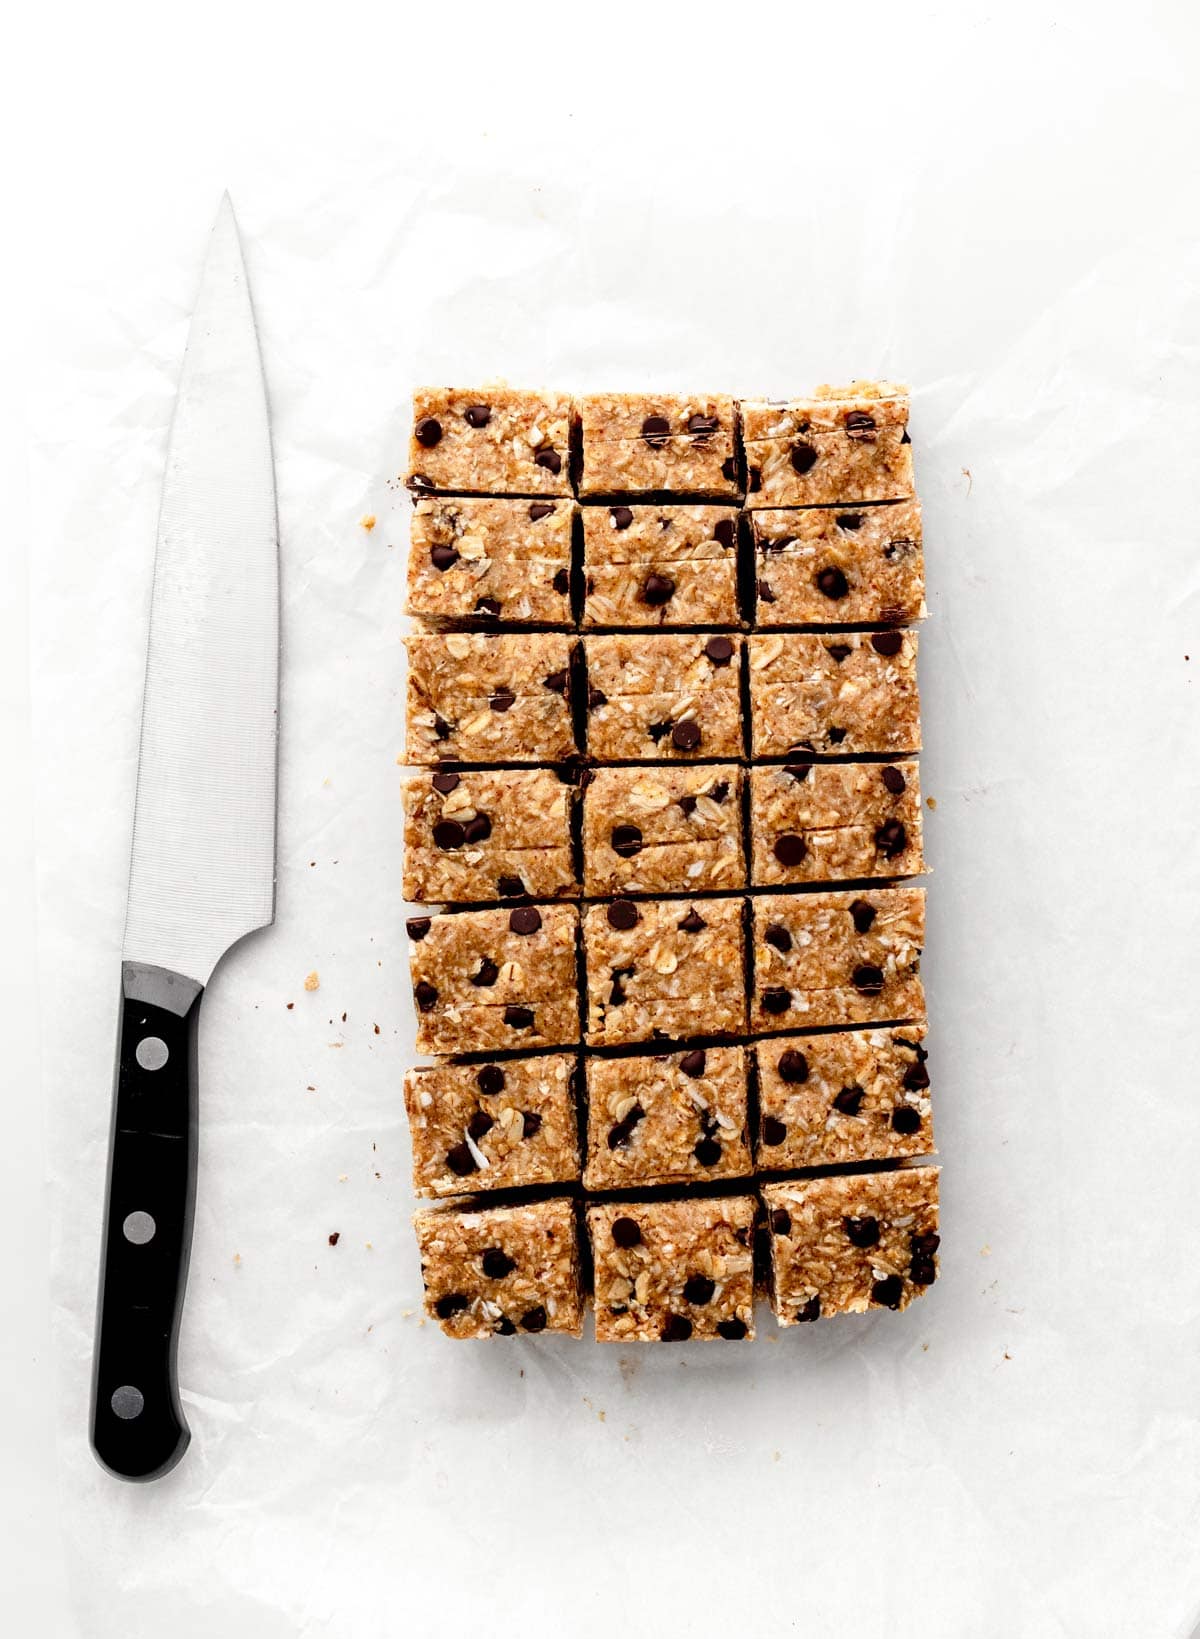 Cut heavenly hunks cookie bars on a cutting board next to a knife.